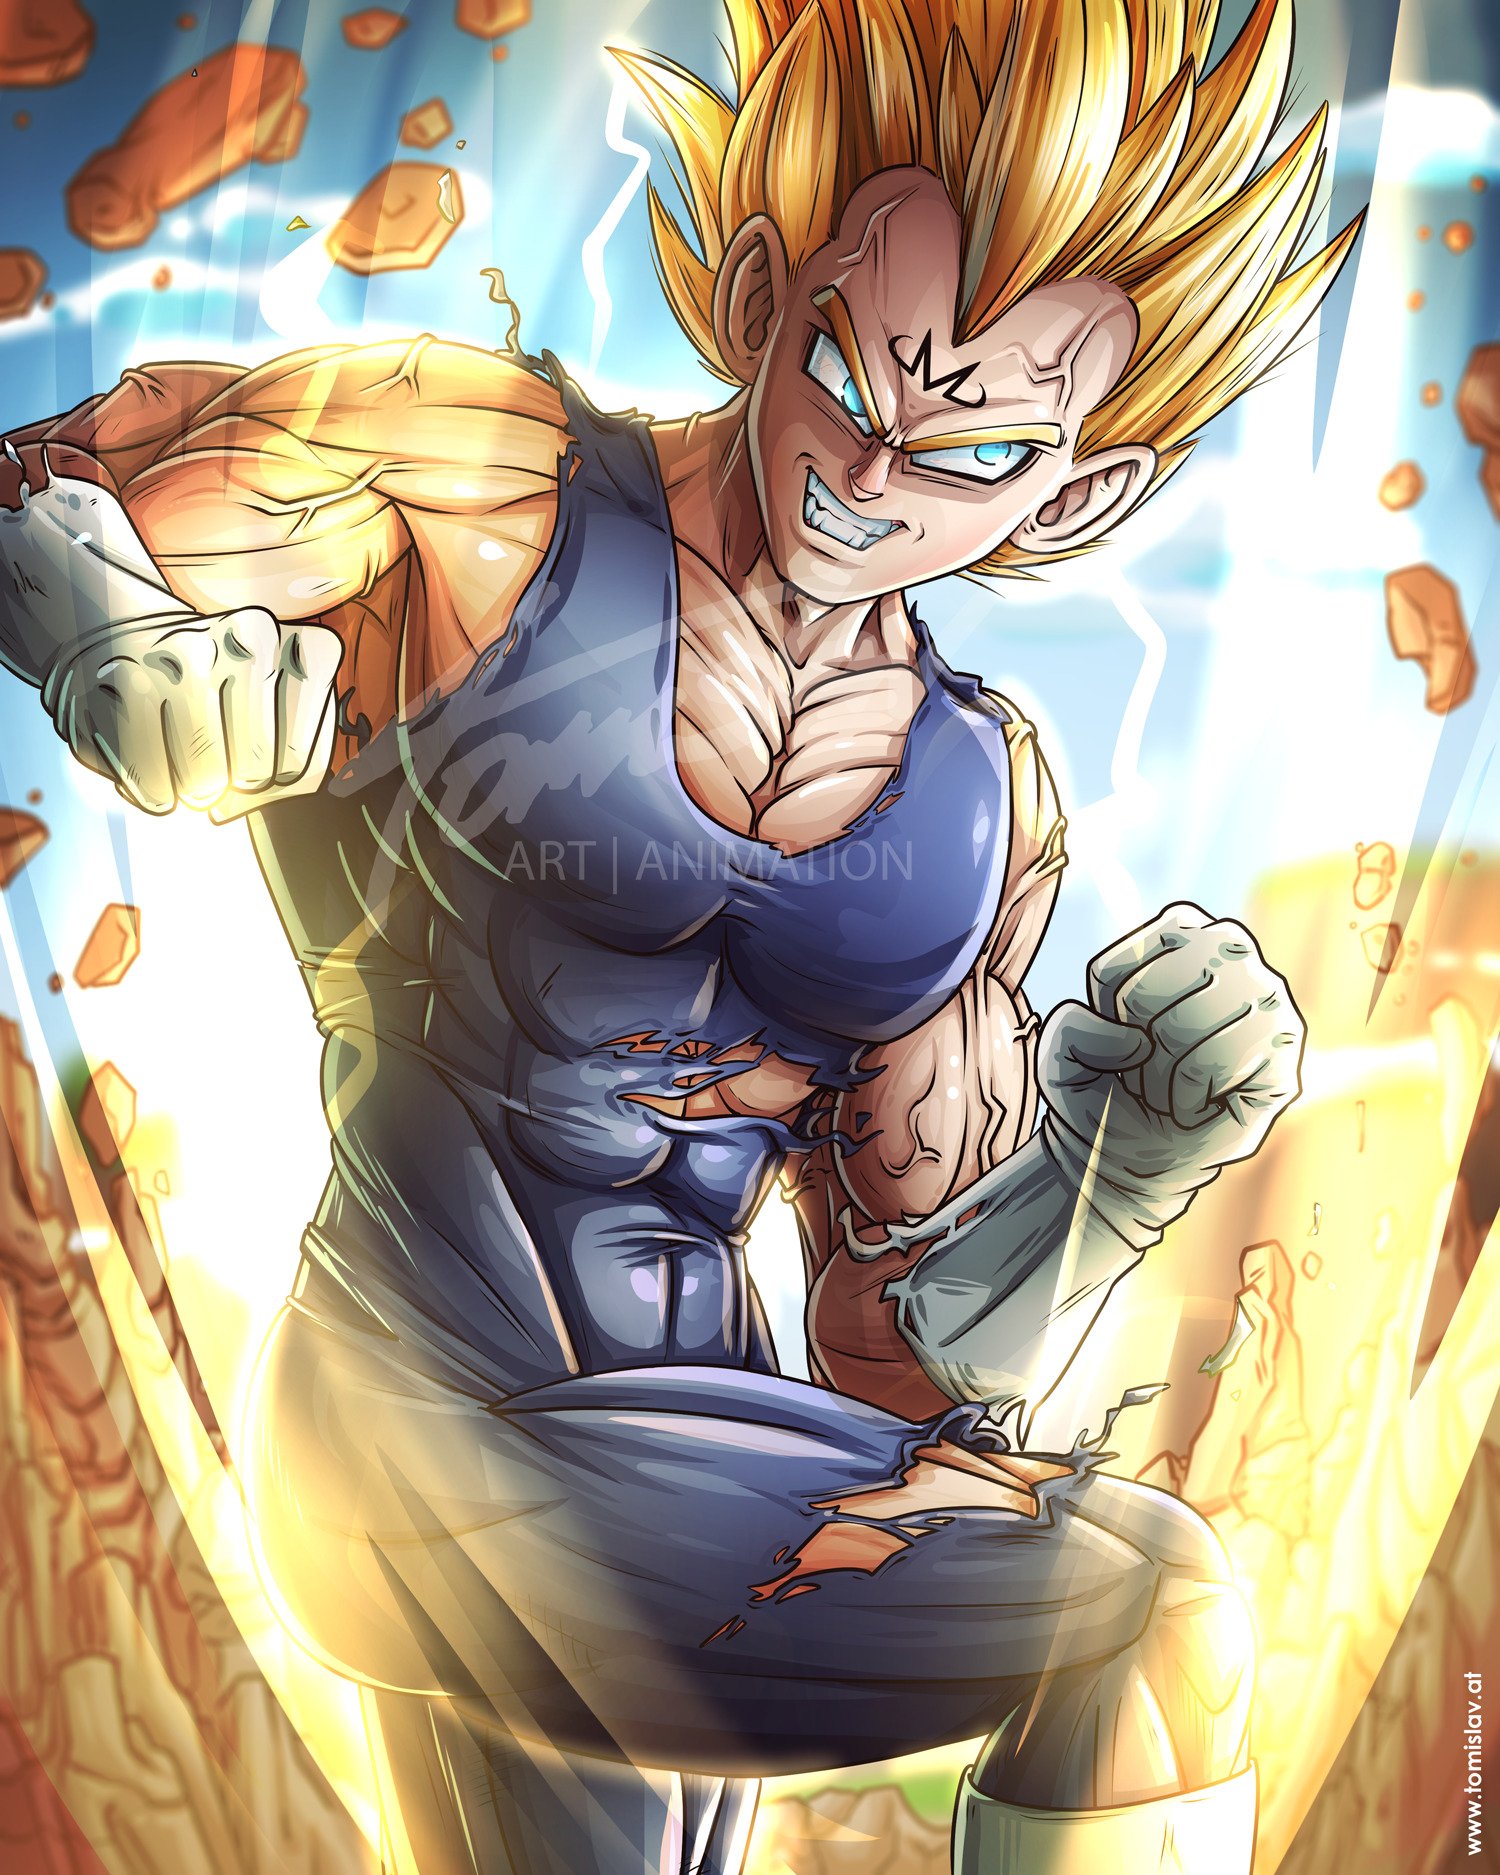 Download wallpaper 840x1336 vegeta anime minimal 2020 iphone 5 iphone  5s iphone 5c ipod touch 840x1336 hd background 24569